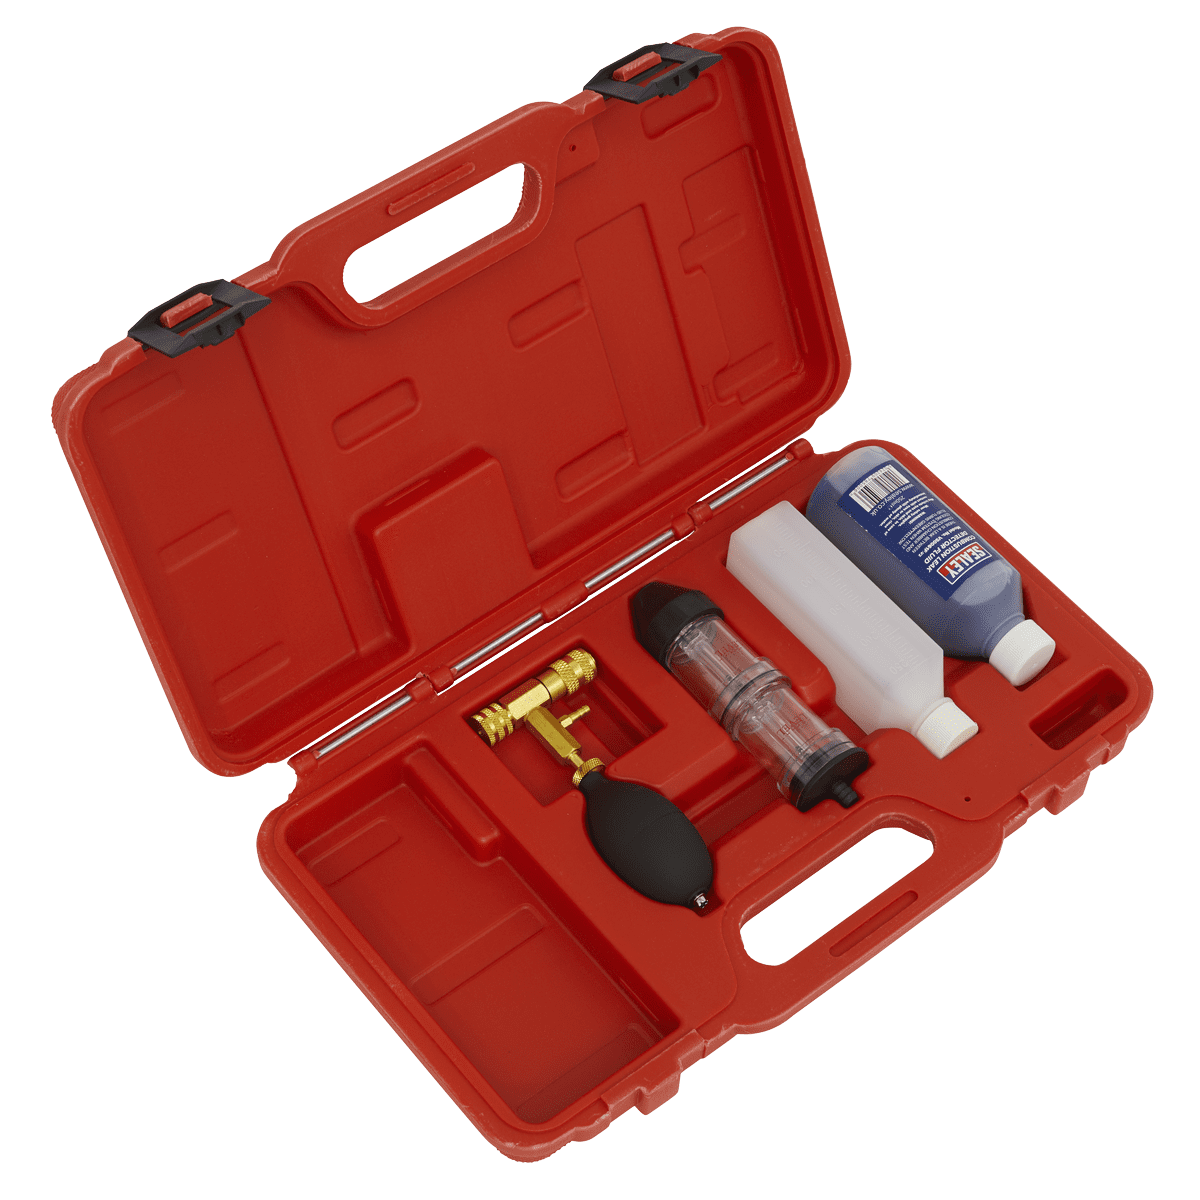 Coolant And Air Con Leak Detection Kits Archives Garage Buying Group